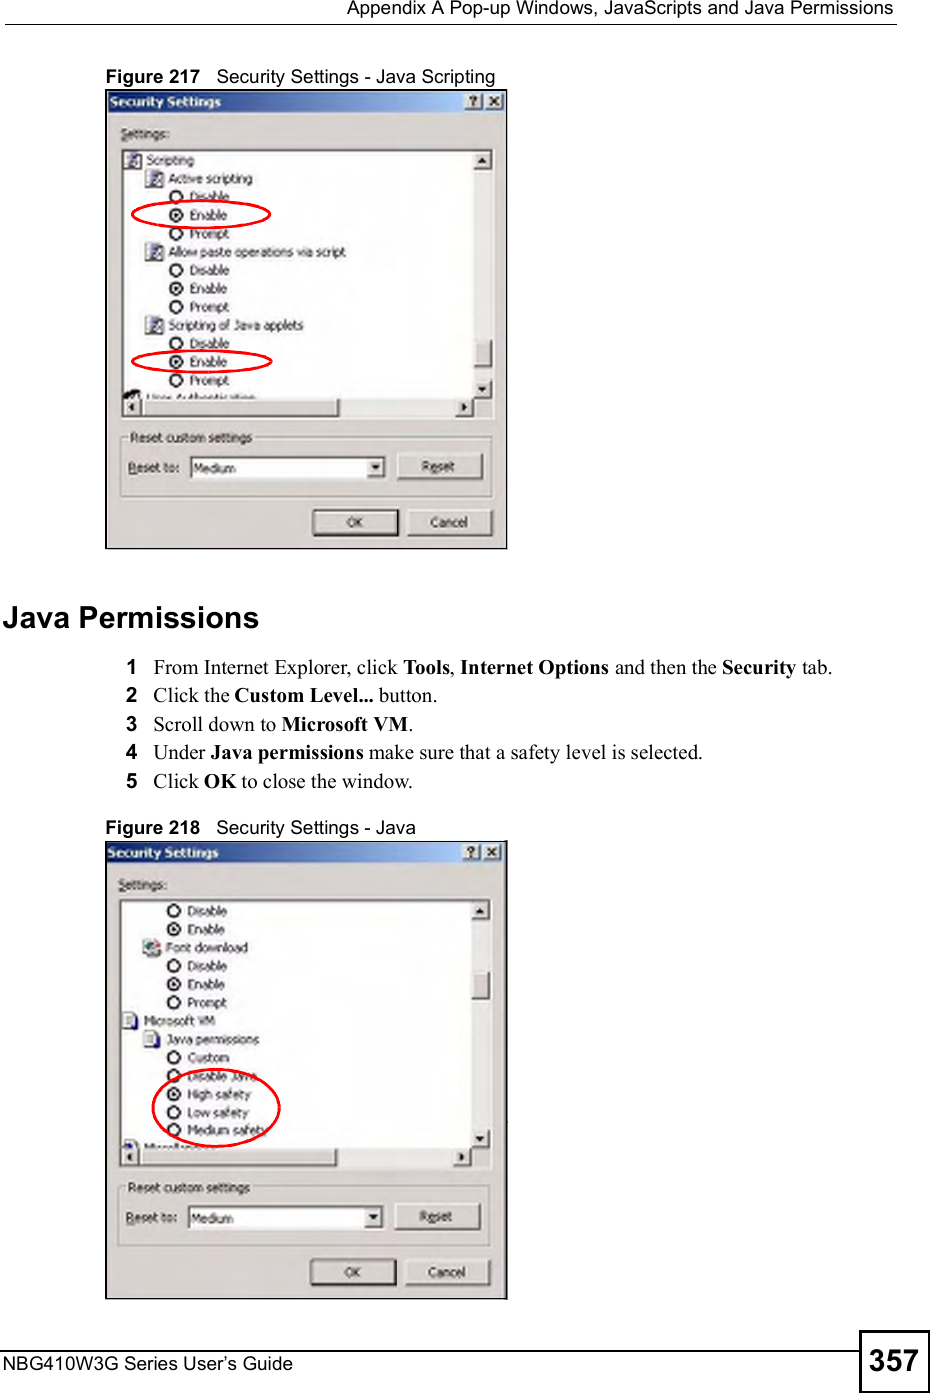  Appendix APop-up Windows, JavaScripts and Java PermissionsNBG410W3G Series User s Guide 357Figure 217   Security Settings - Java ScriptingJava Permissions1From Internet Explorer, click Tools, Internet Options and then the Security tab. 2Click the Custom Level... button. 3Scroll down to Microsoft VM. 4Under Java permissions make sure that a safety level is selected.5Click OK to close the window.Figure 218   Security Settings - Java 